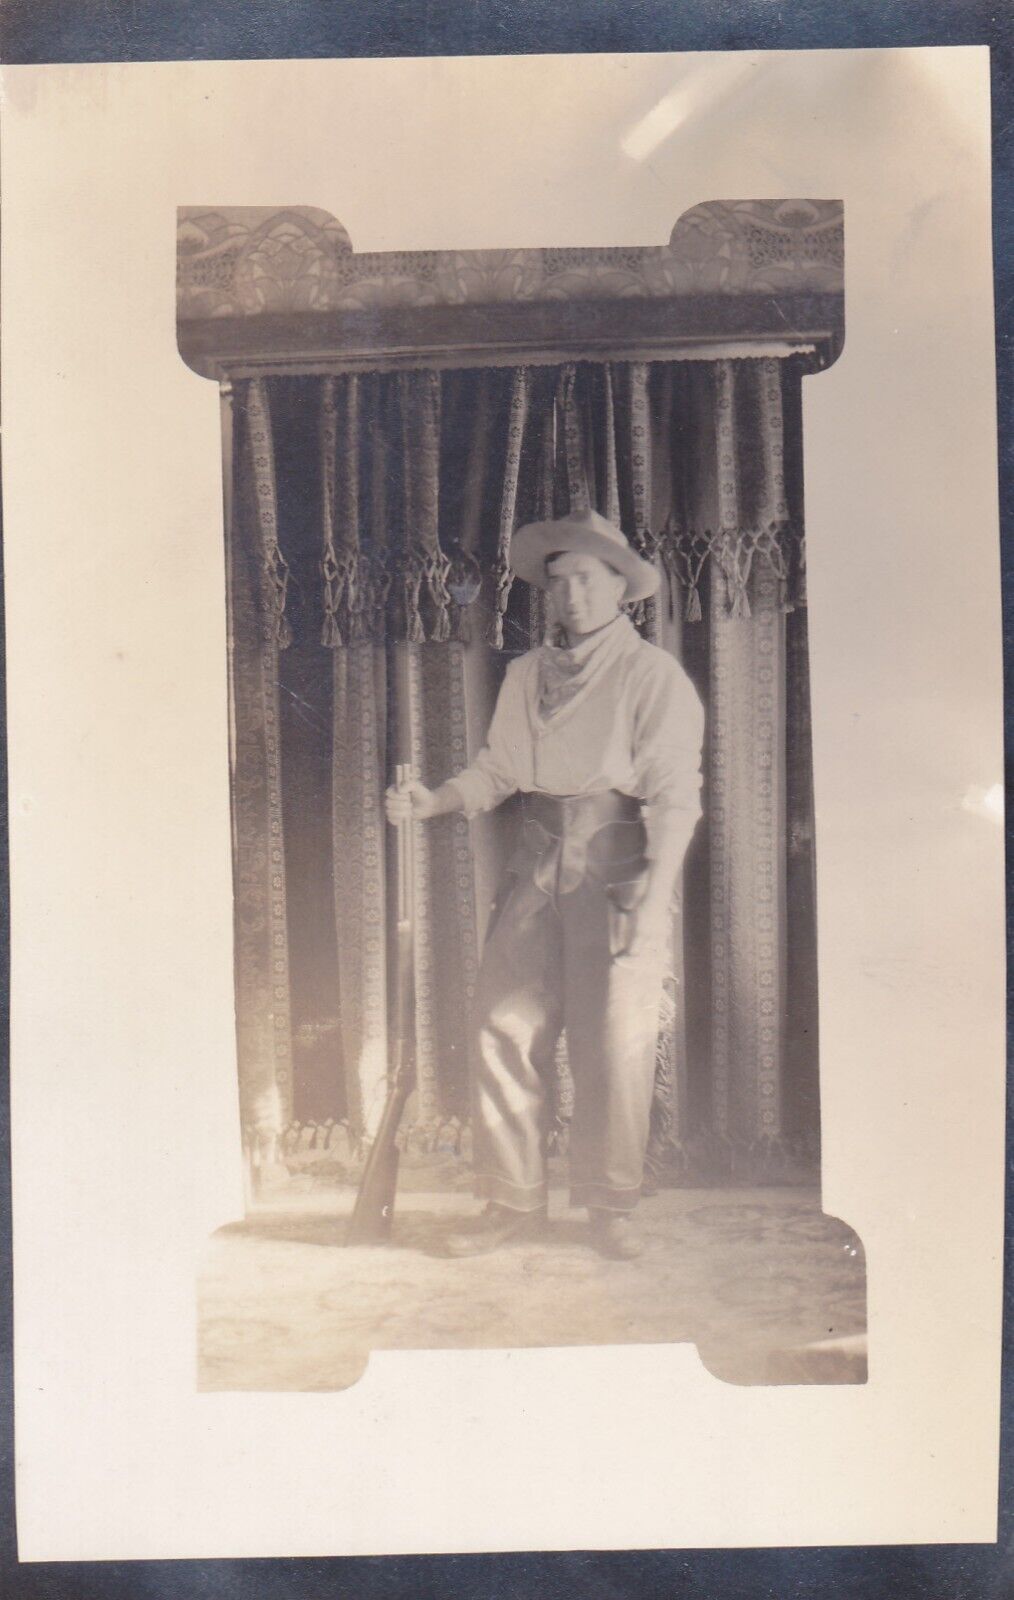 RPPC Real Photo Postcard of Cowboy Holding Rifle Wearing Leather Chaps